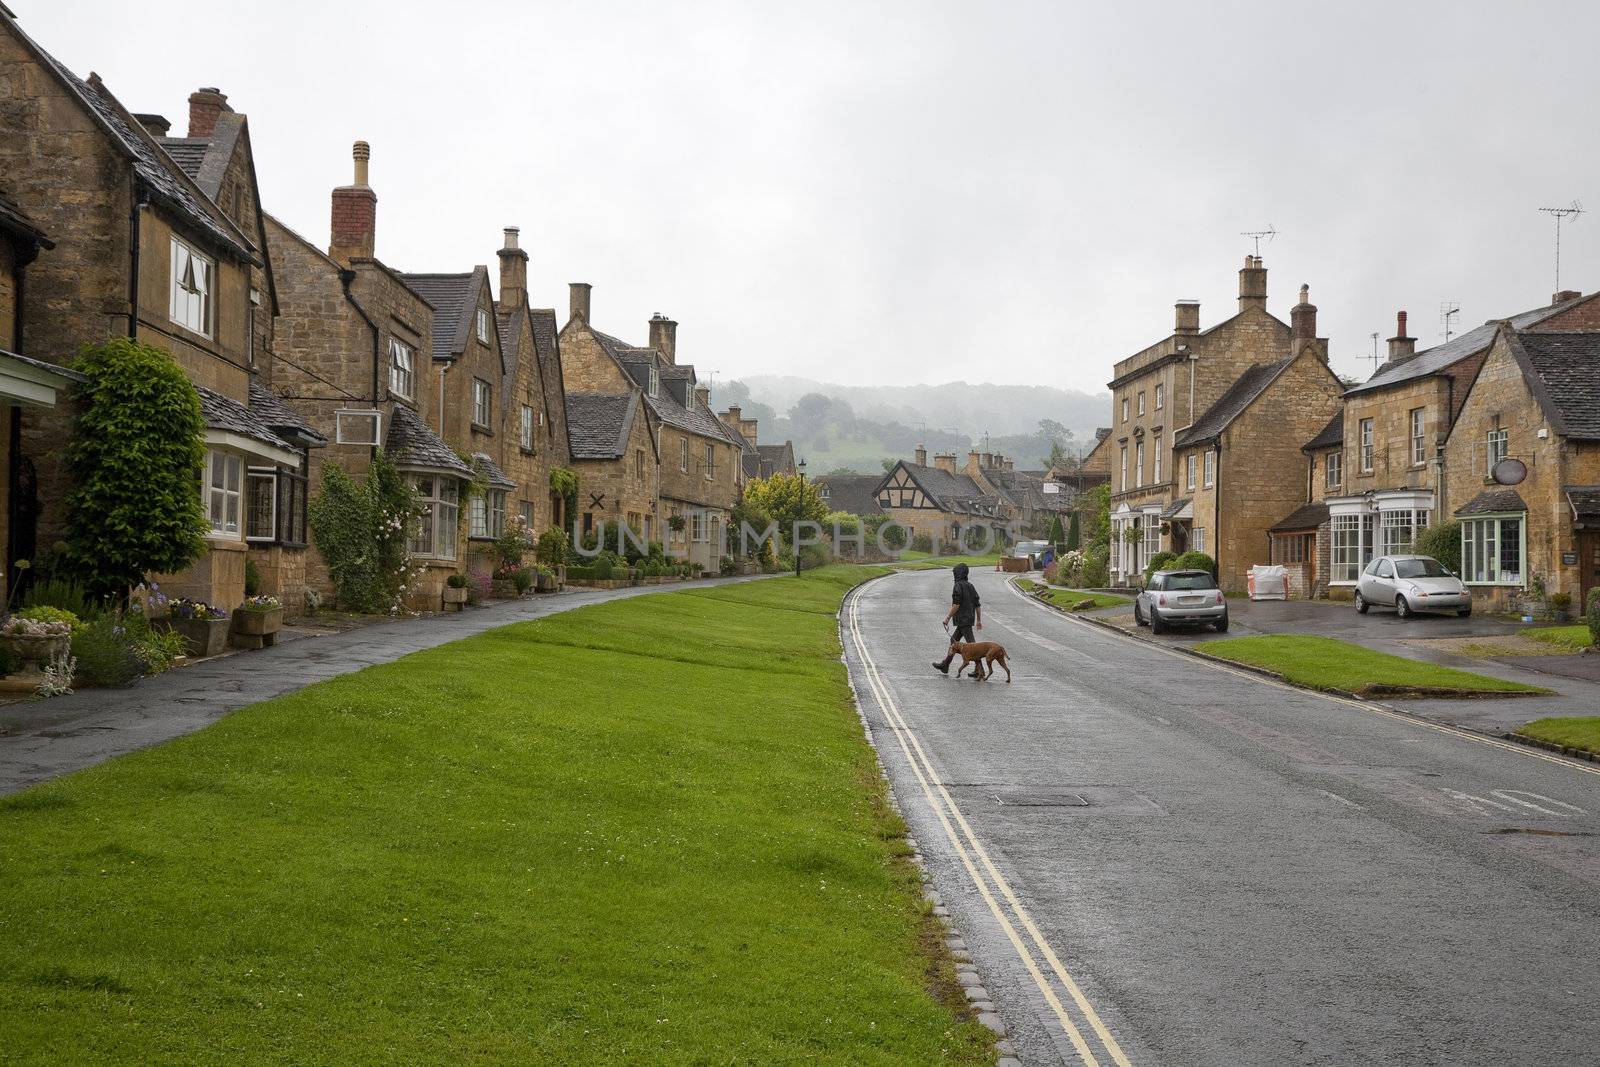 Teenager walking the dog in the picturesque village of Broadway, Cotwold, United Kingdom while it is raining.